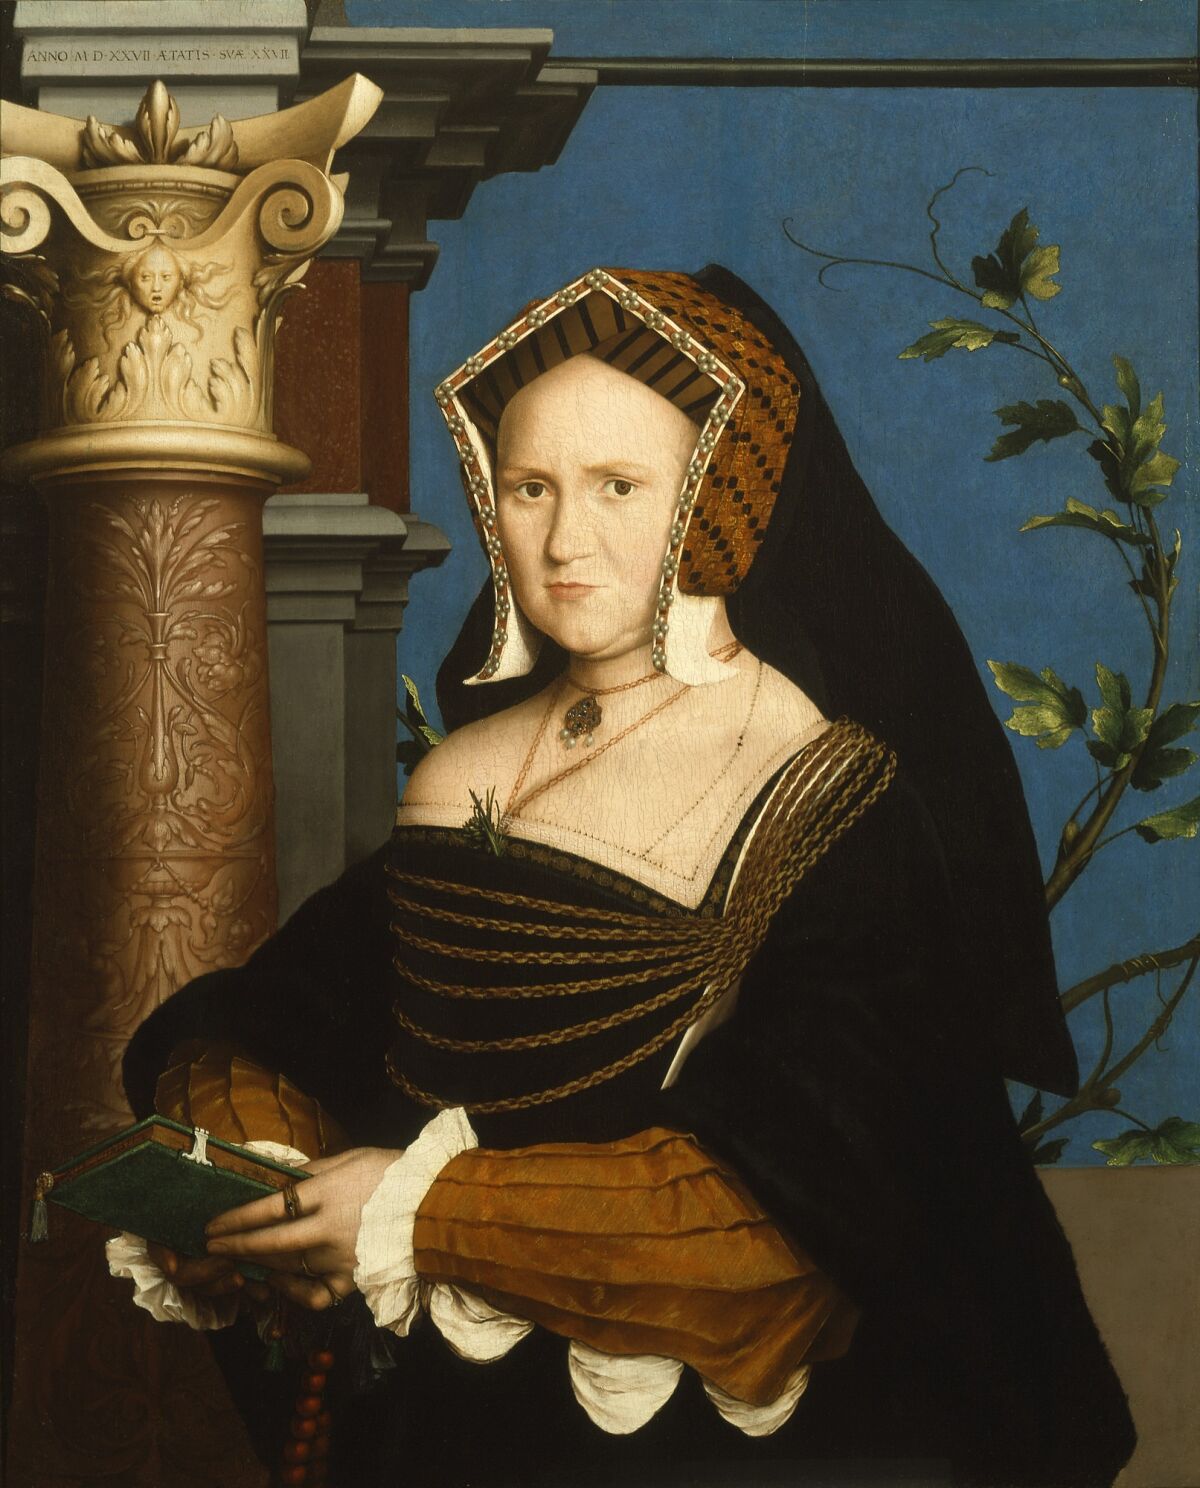 A painting of a woman wearing an elaborate headdress and gown, holding a book. 